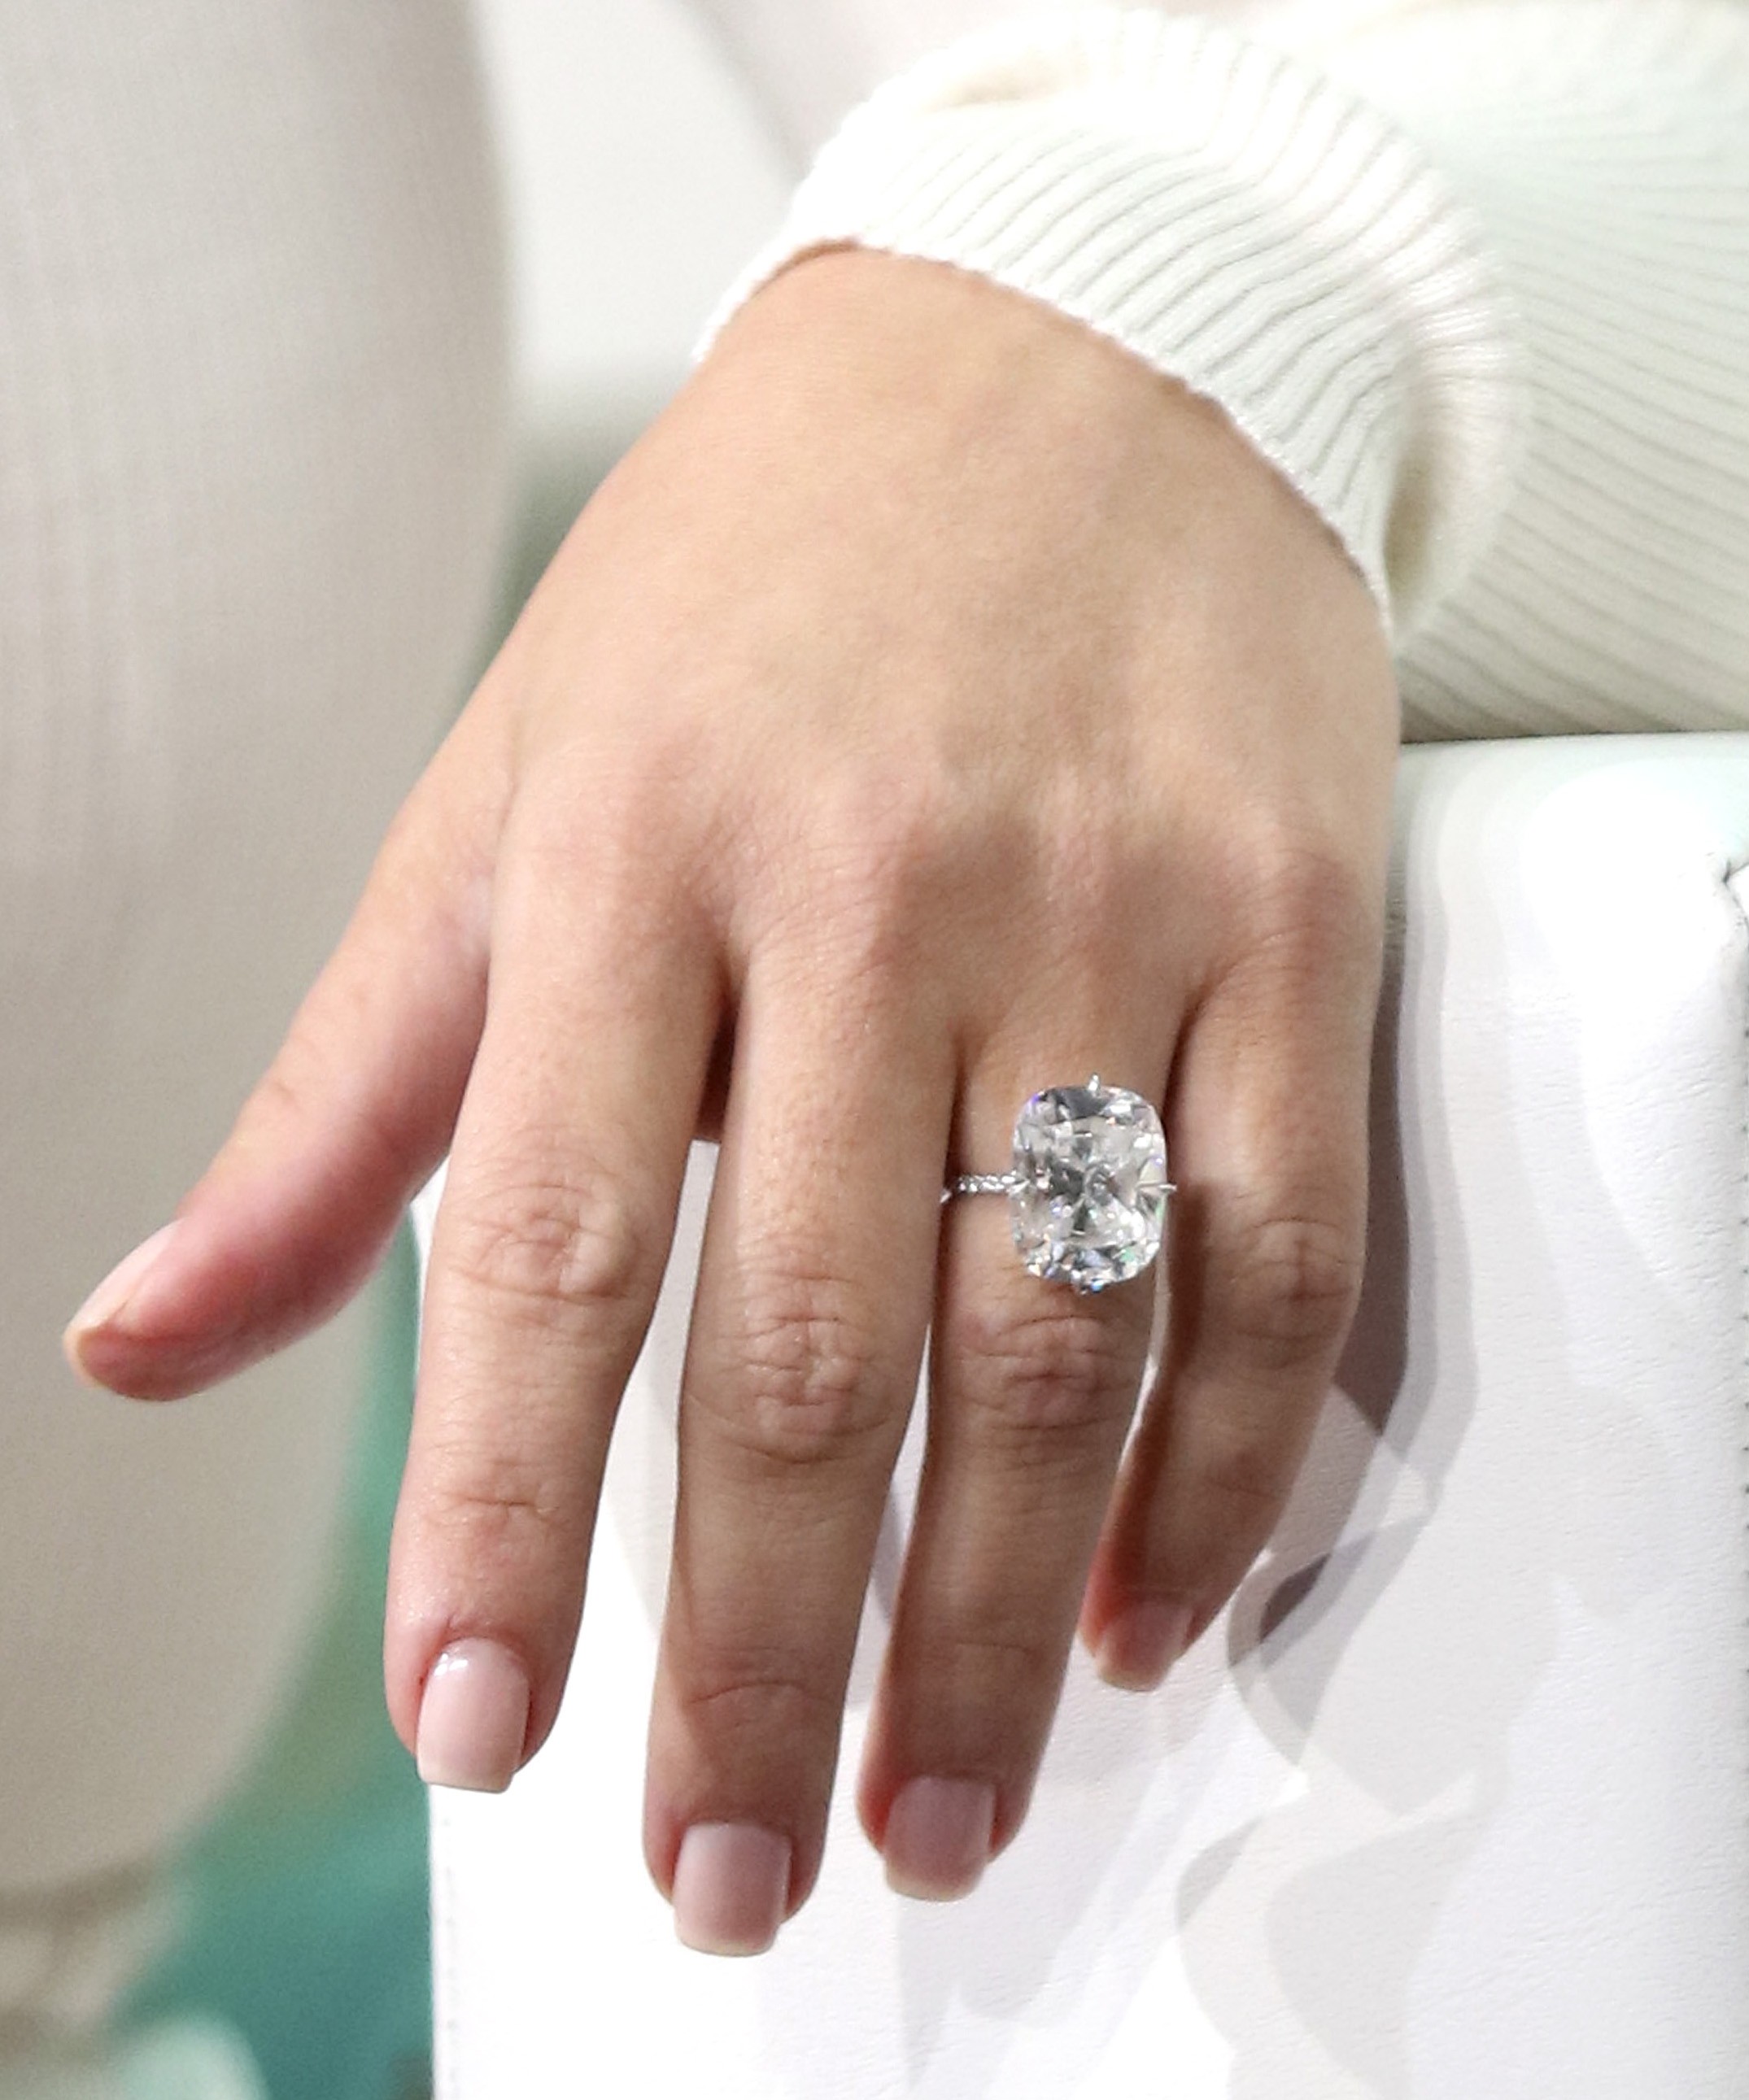 Kim Kardashian Has a New Ring That Looks Exactly Like Her